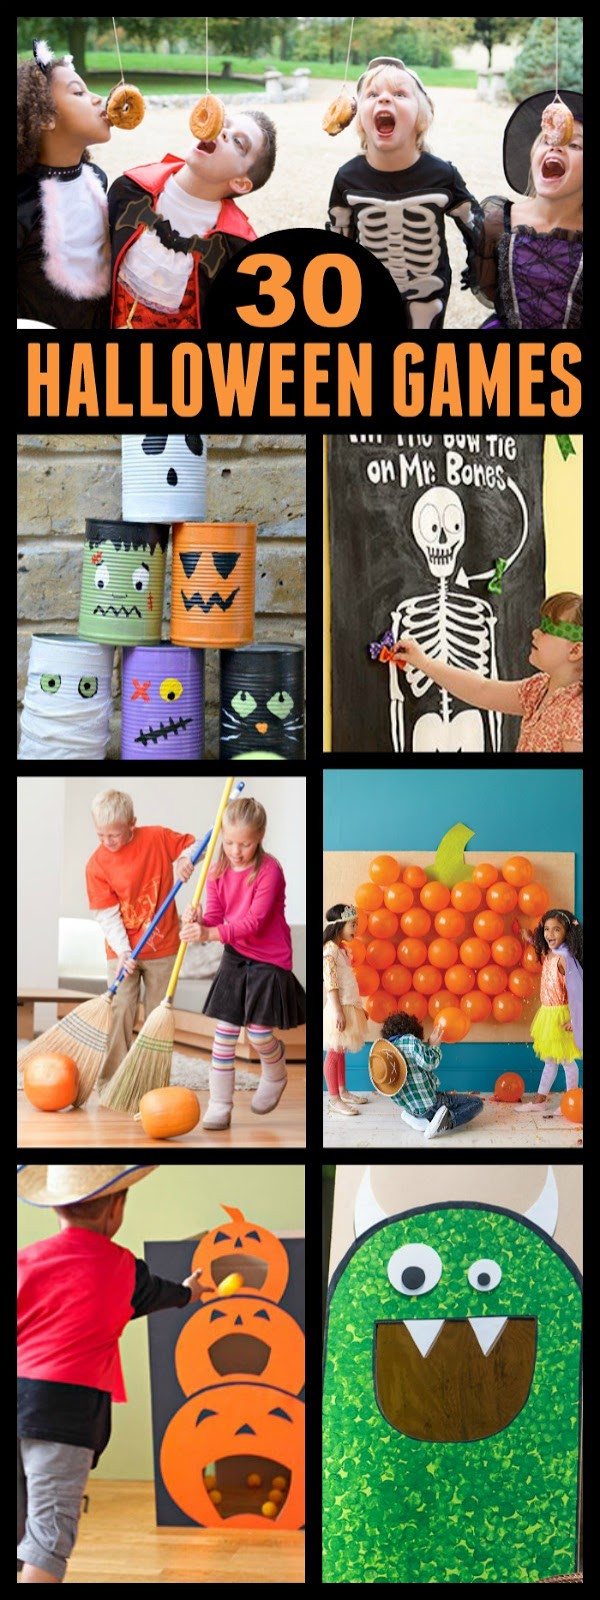 Halloween Games Party Ideas
 Halloween Games for Kids